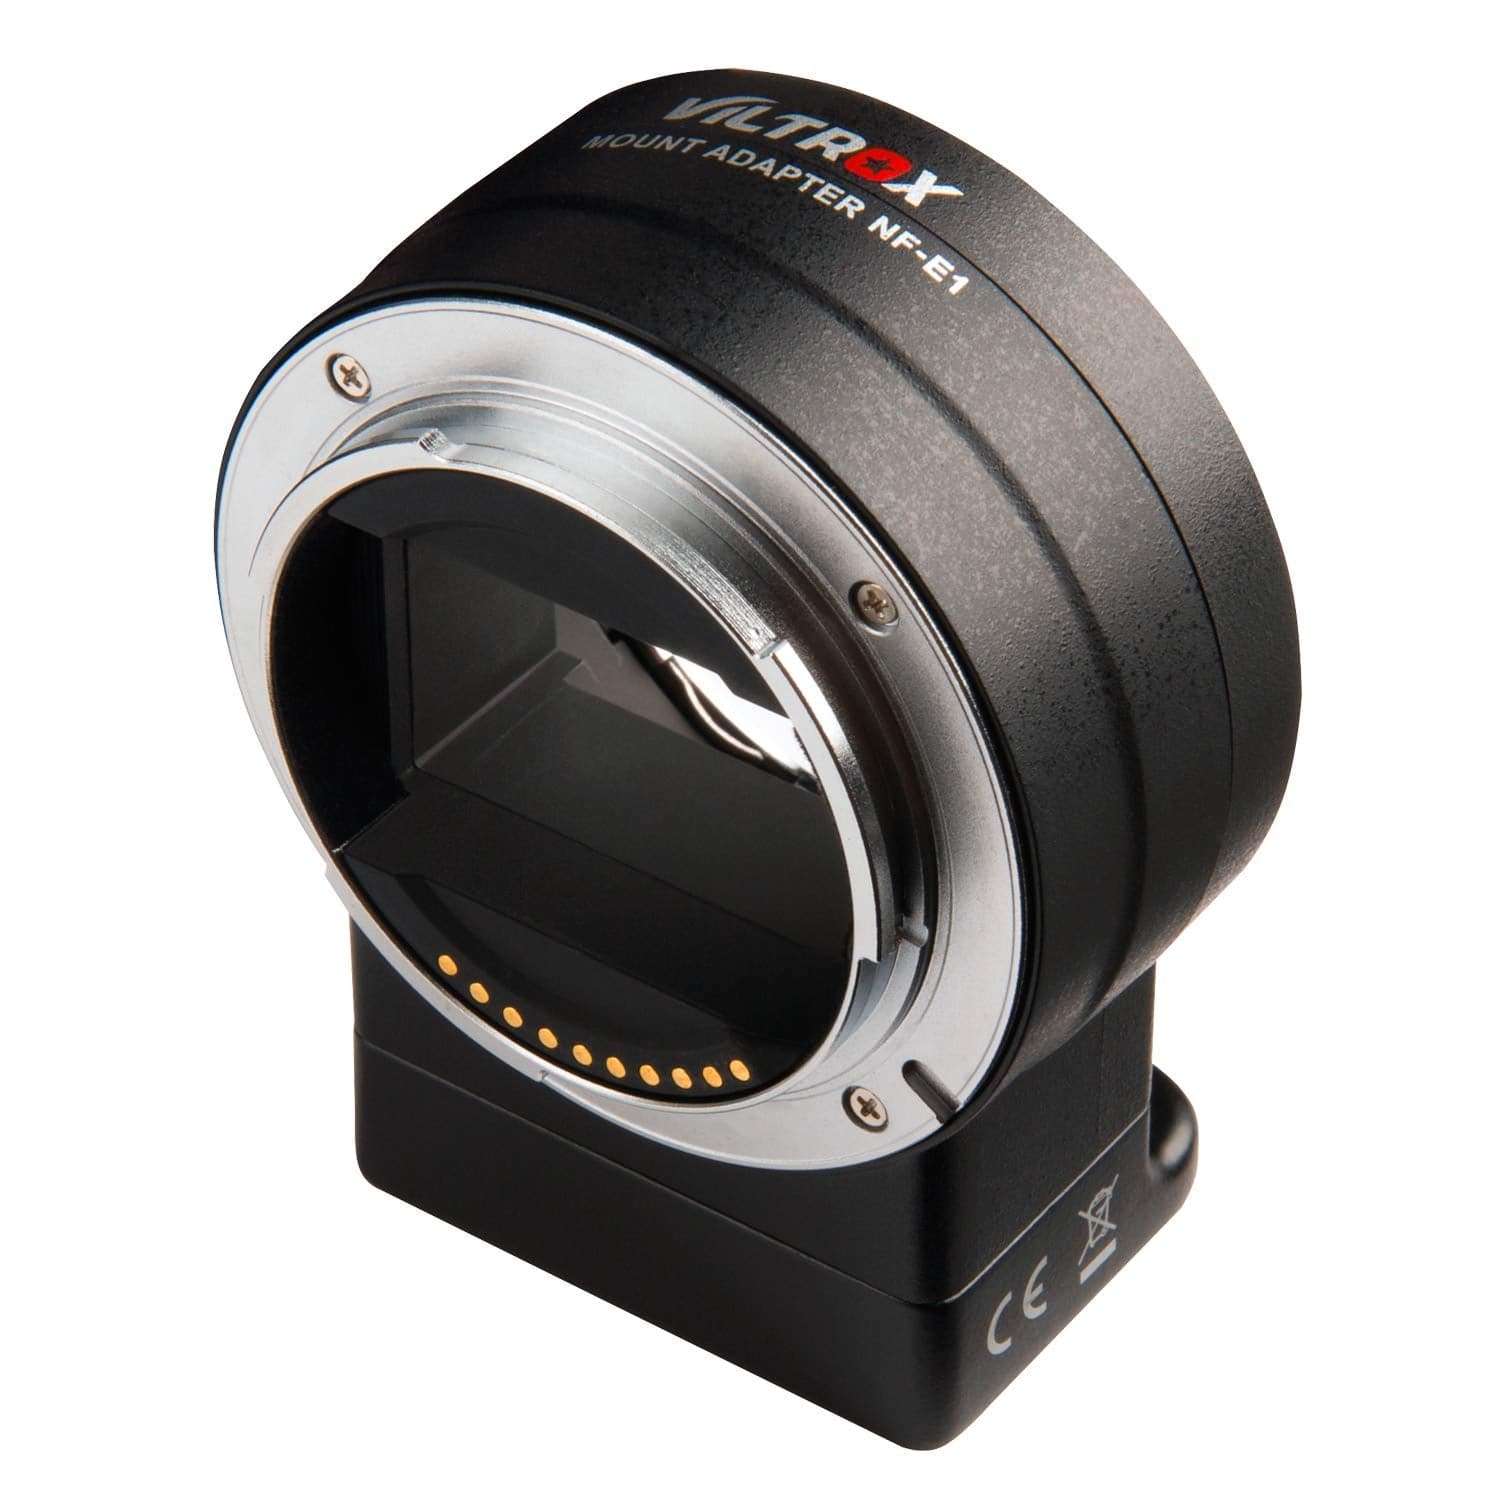 VILTROX NF-E1 Auto Focus AF Electronic Lens Mount Adapter  VR for Nikon F Lens to Sony E Mount